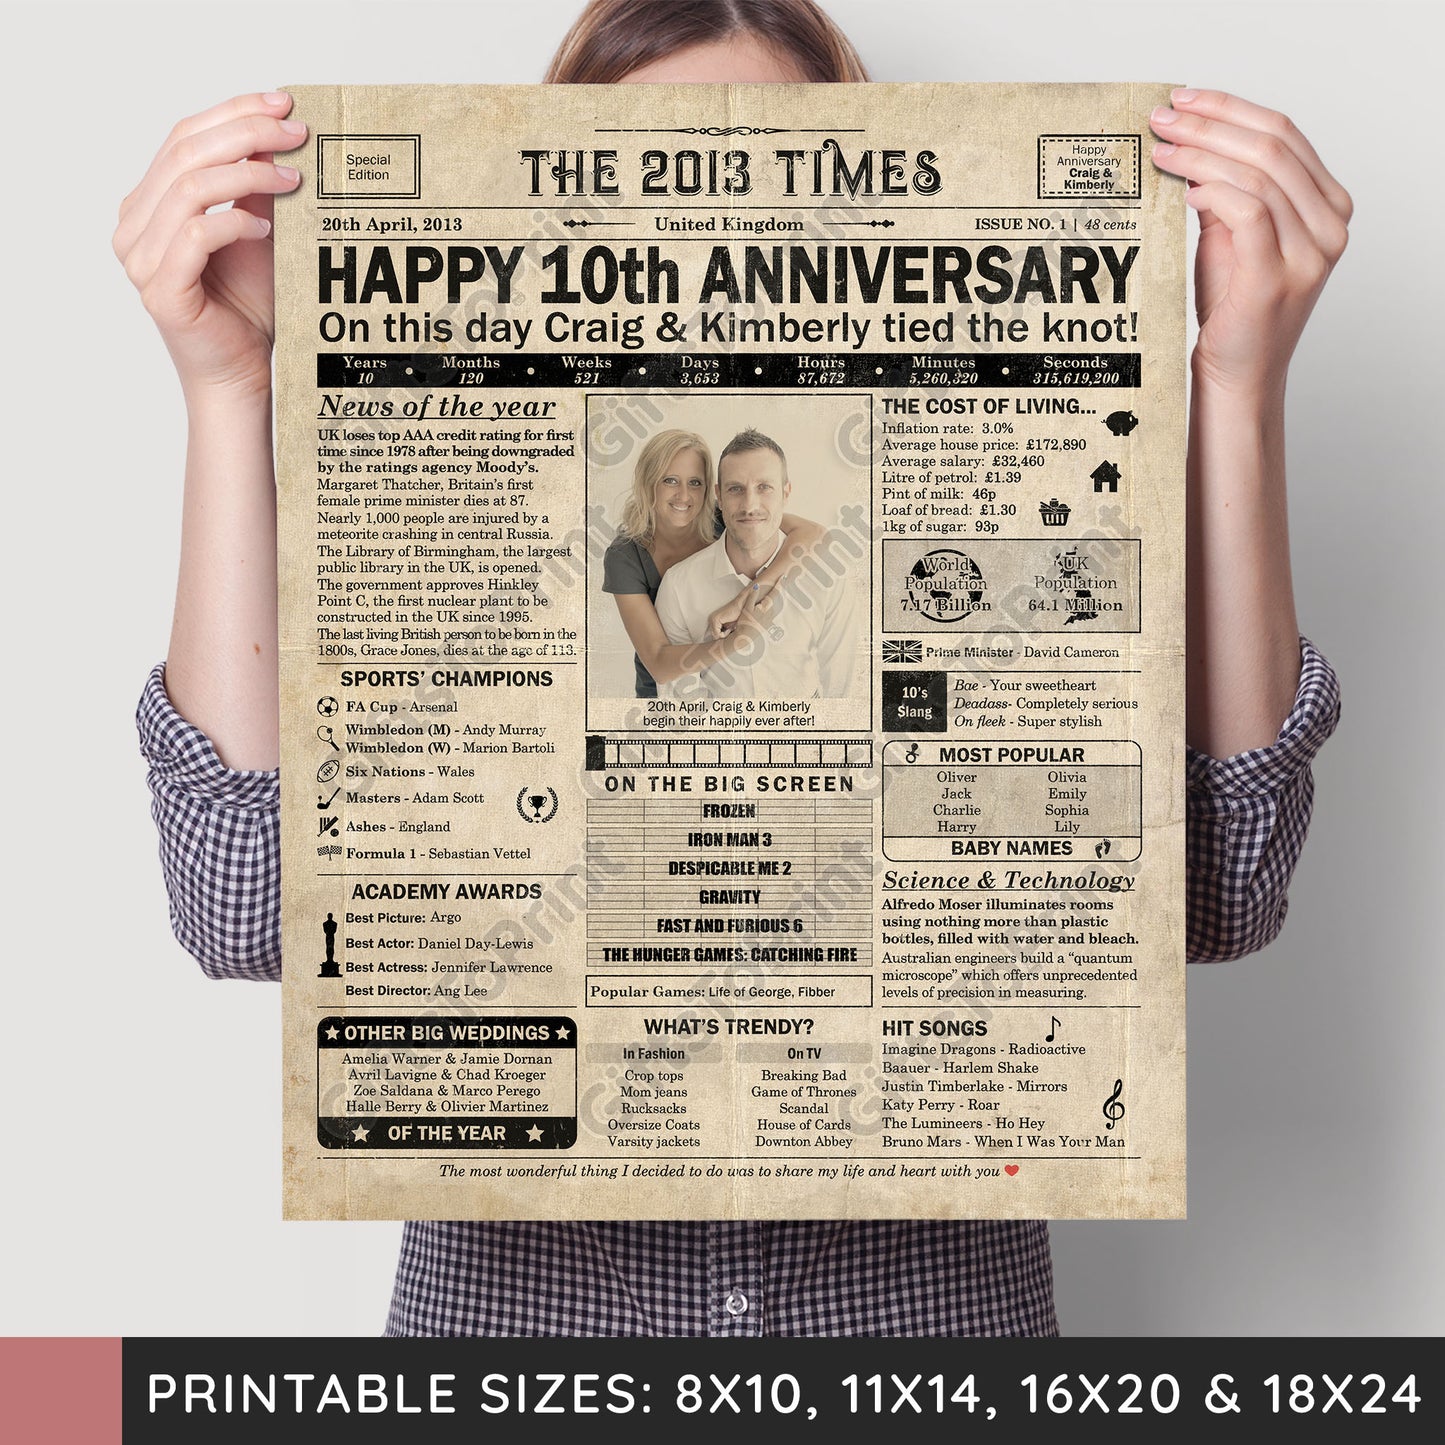 Personalised 10th Anniversary Gift: A Printable UK Newspaper Poster of 2013